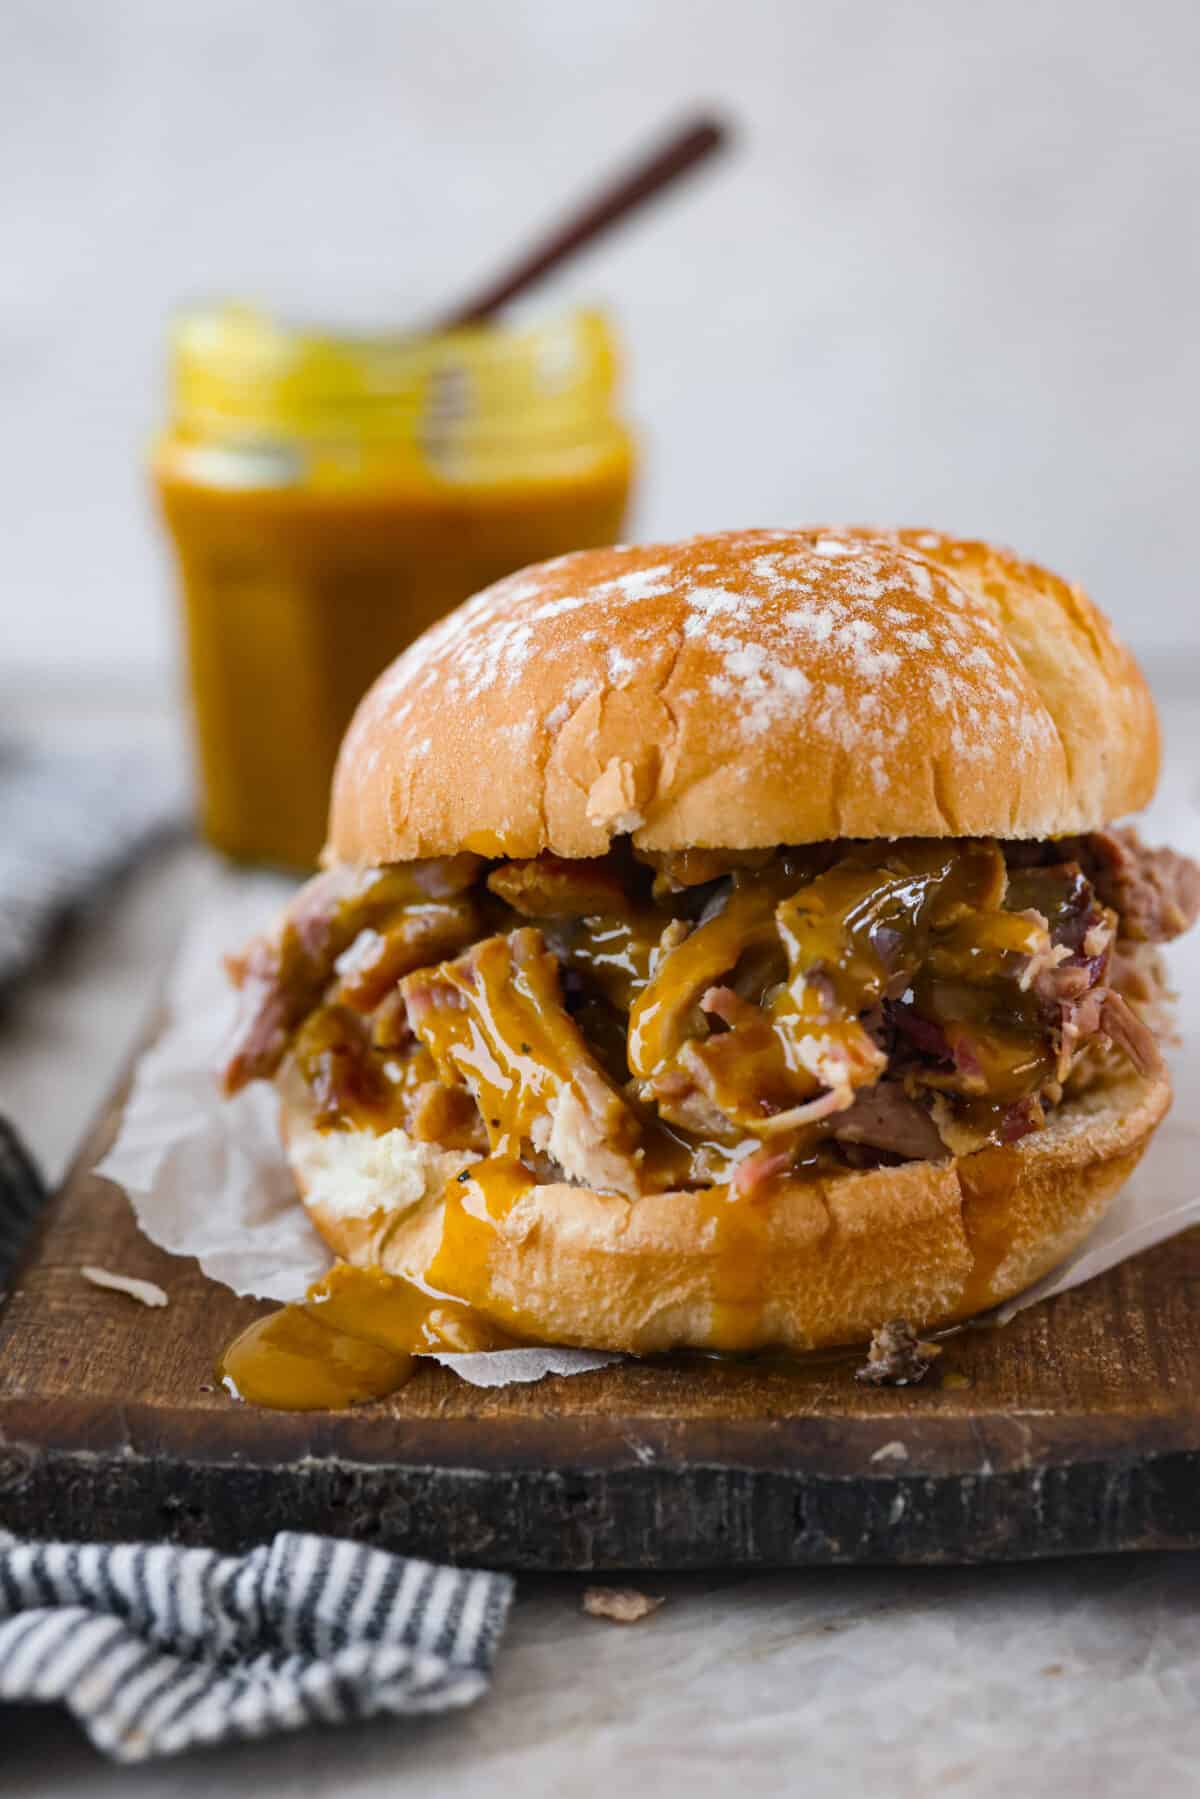 A pulled pork sandwich made with the mustard bbq sauce.